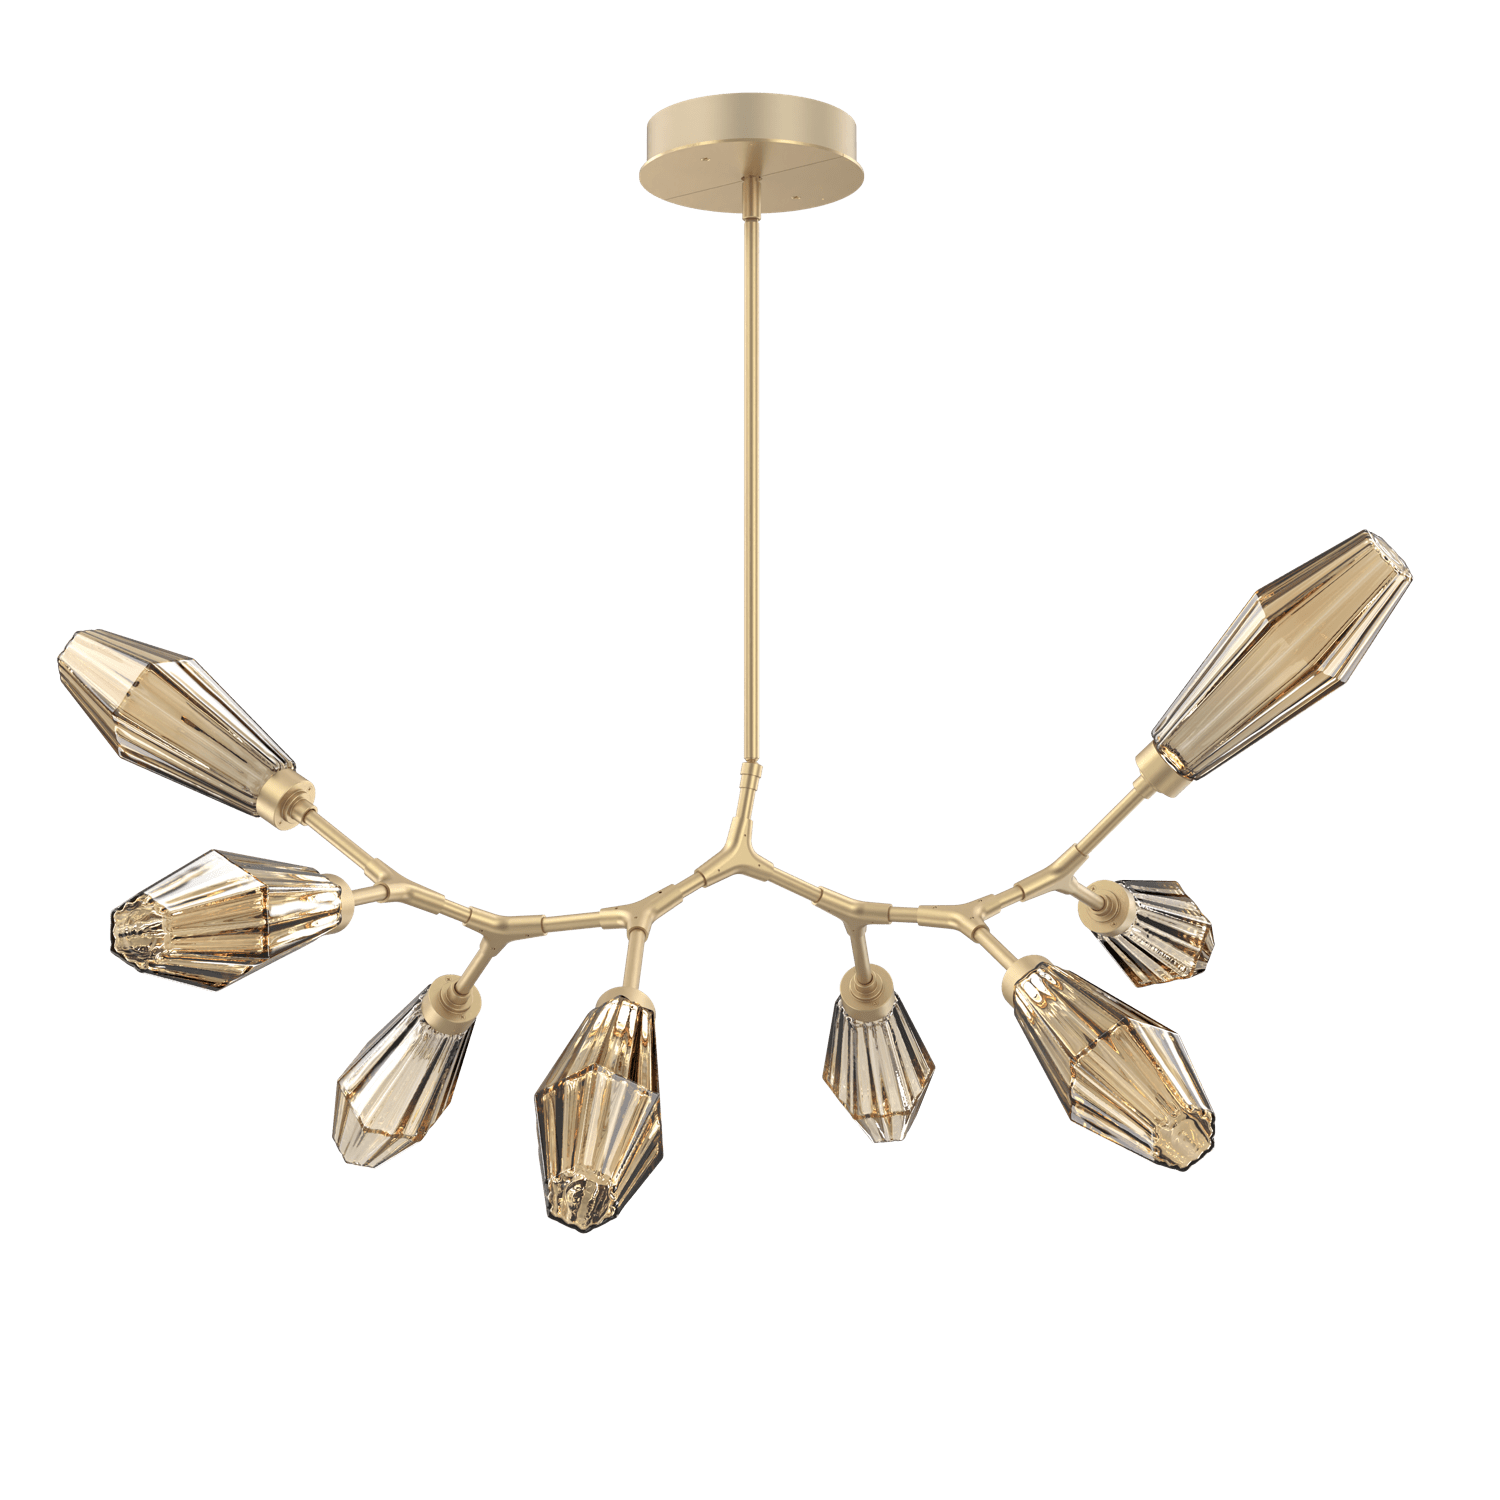 PLB0049-BB-GB-RB-Hammerton-Studio-Aalto-8-light-modern-branch-chandelier-with-gilded-brass-finish-and-optic-ribbed-bronze-glass-shades-and-LED-lamping